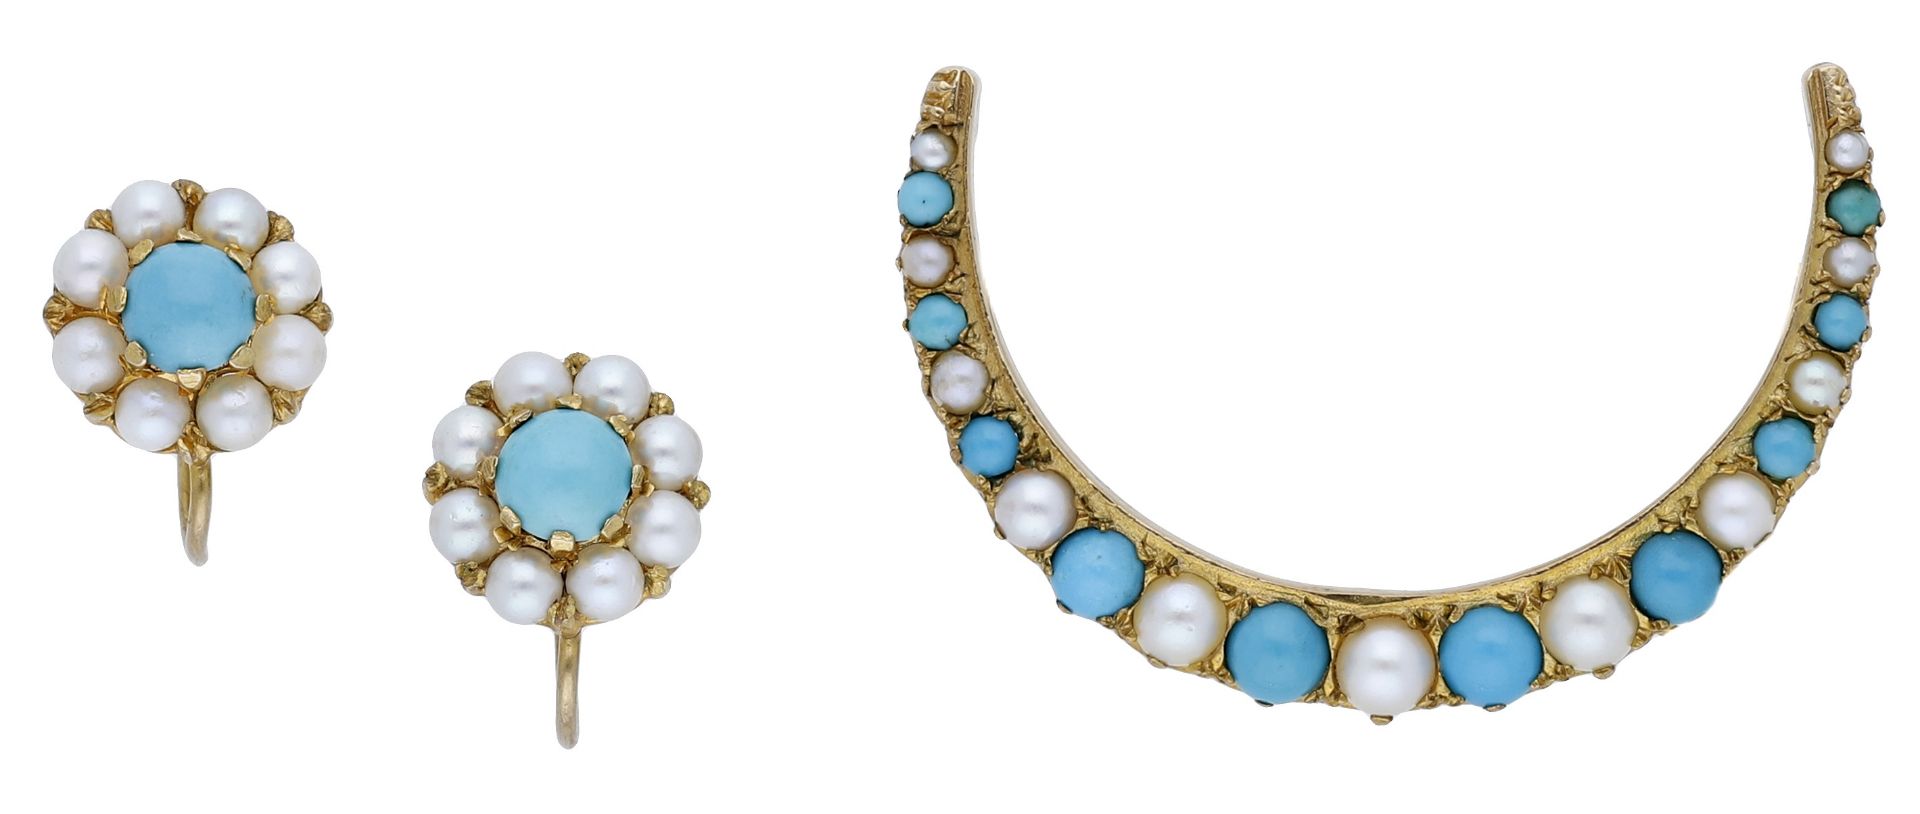 A turquoise and pearl crescent brooch, circa 1900, set with a graduated row of turquoise cab...